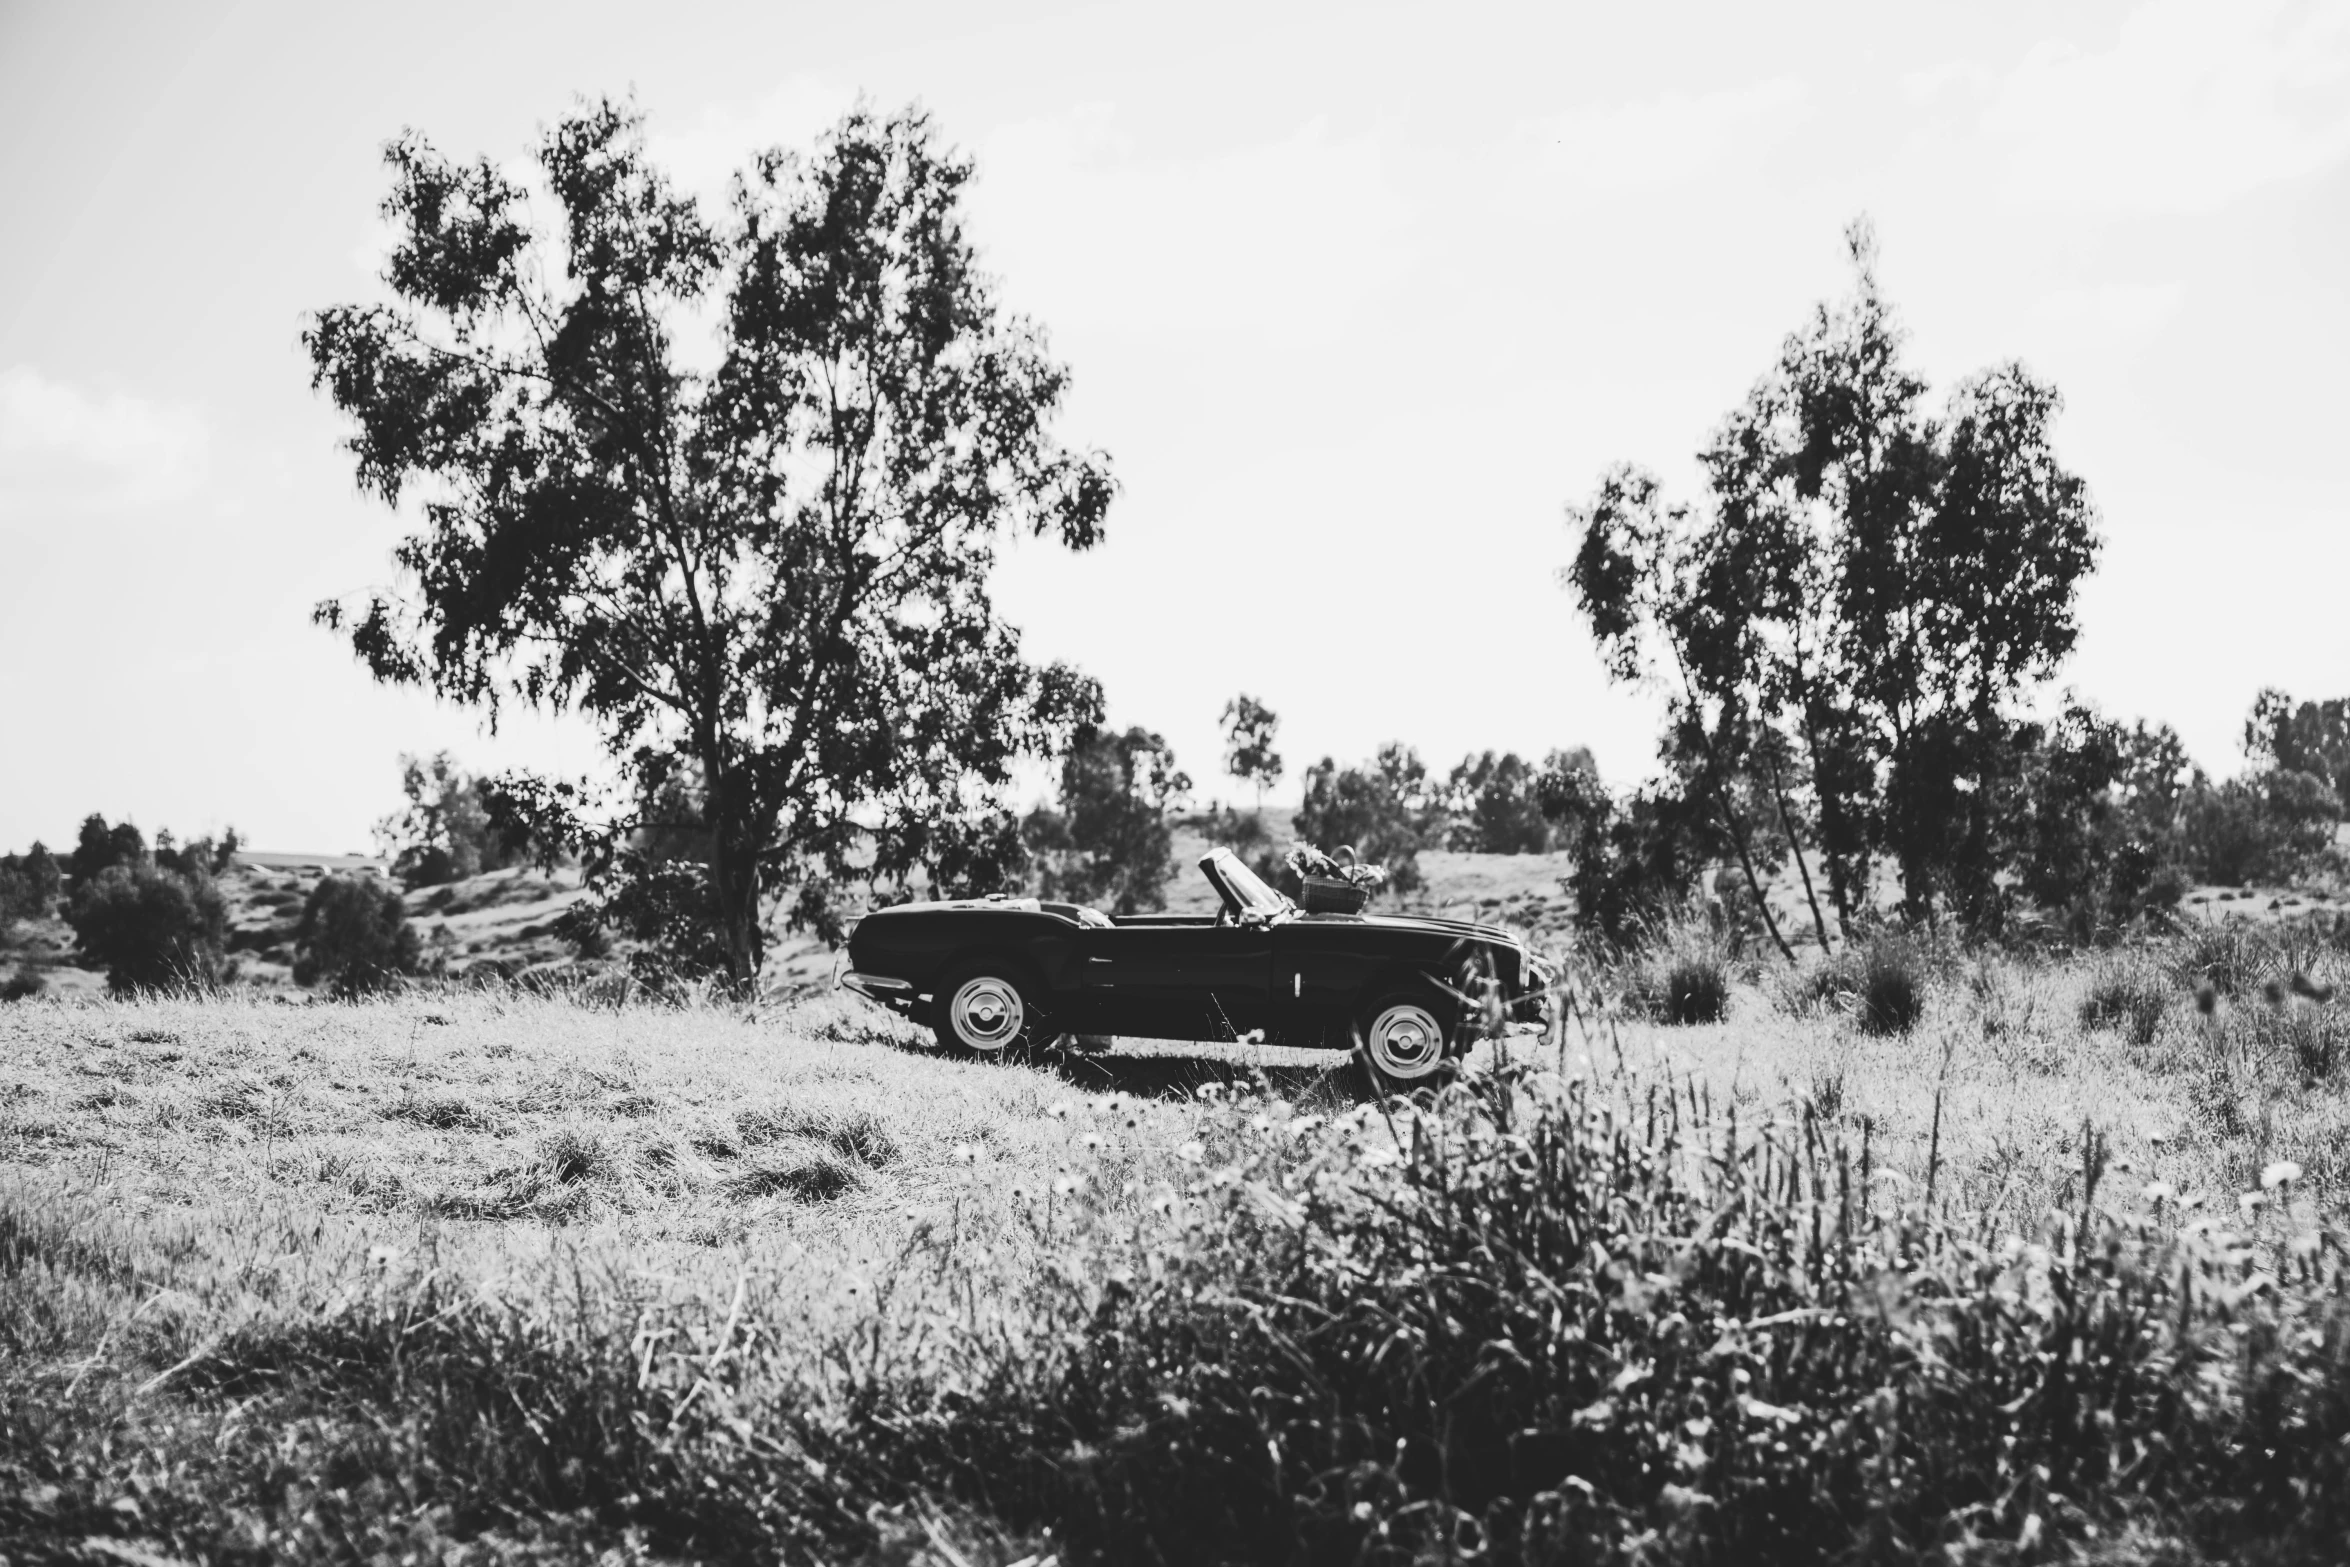 a black and white photo of a car in a field, unsplash, convertible, vintage footage, southern california, amongst foliage